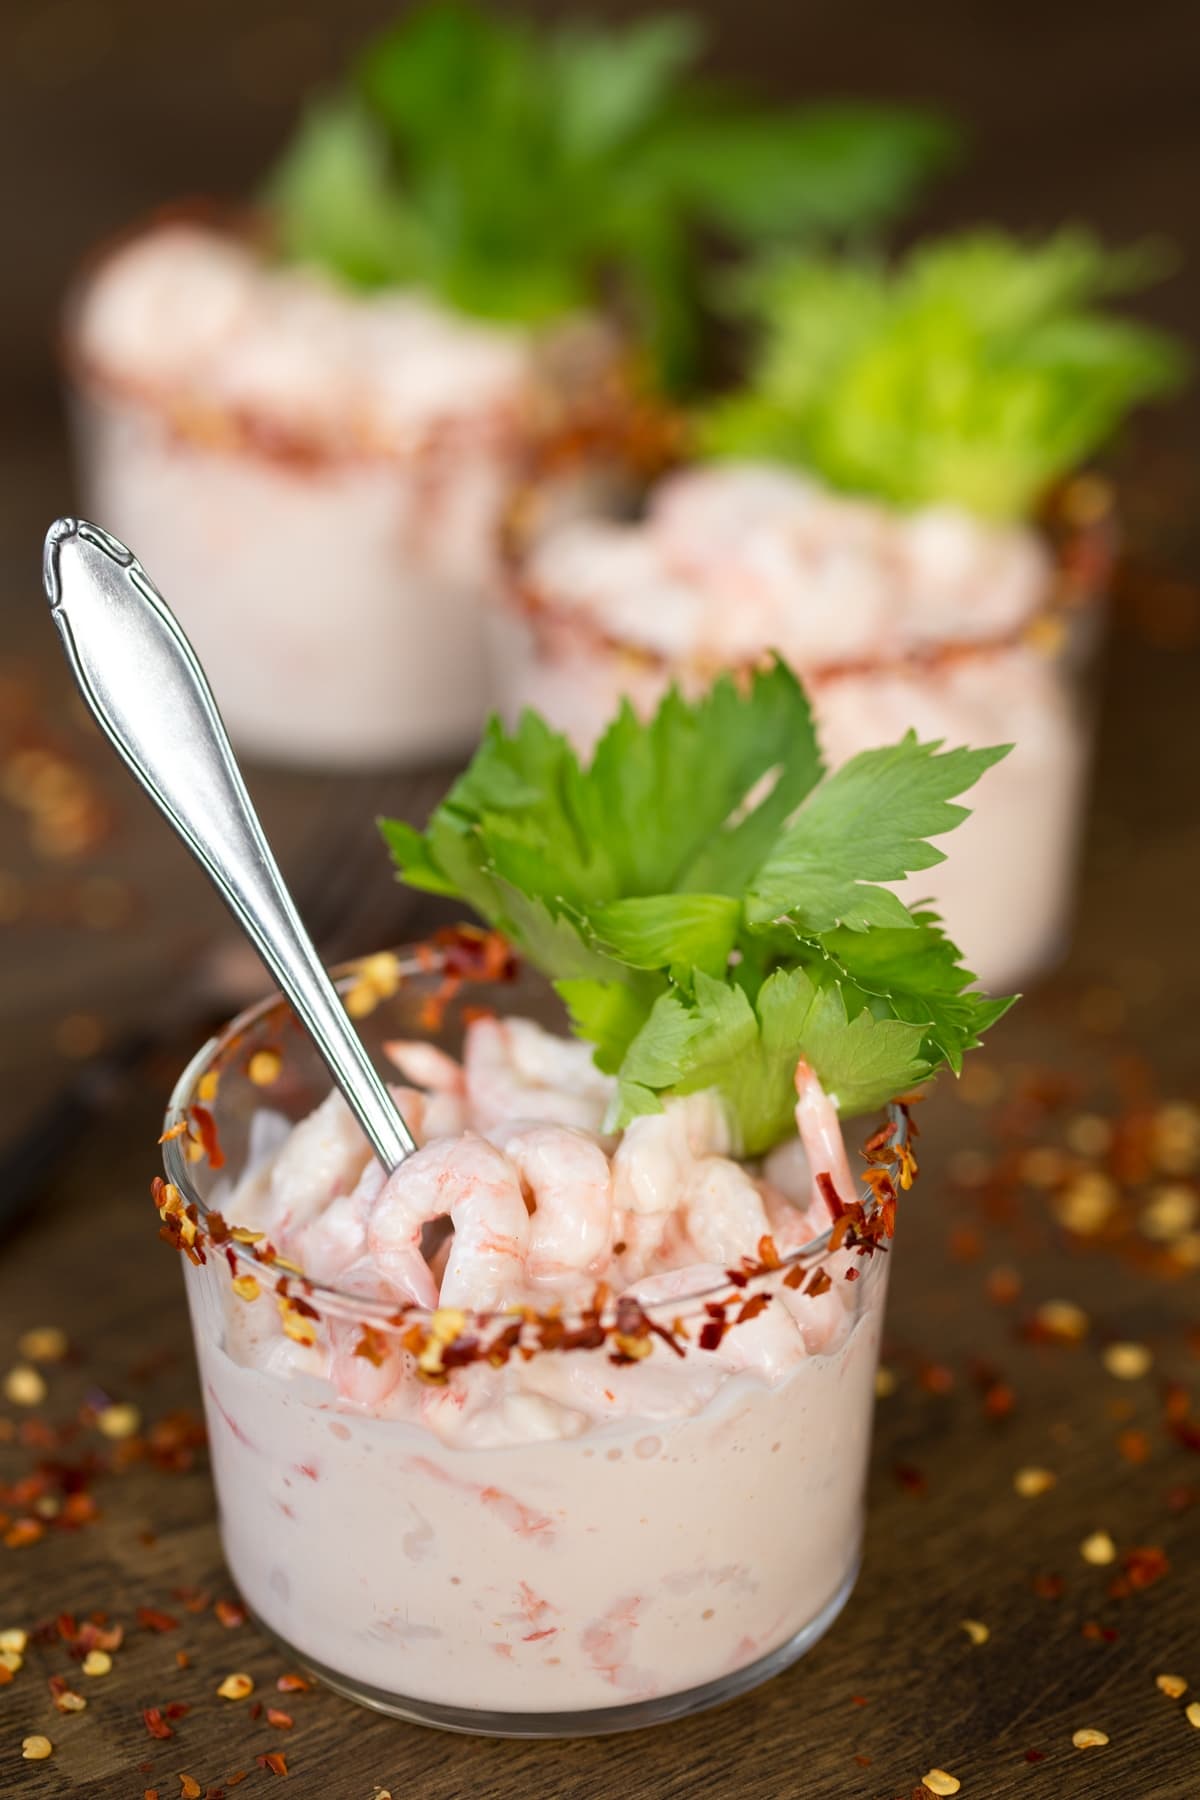 Italian shrimp in cocktail sauce with celery stalk as decoration.